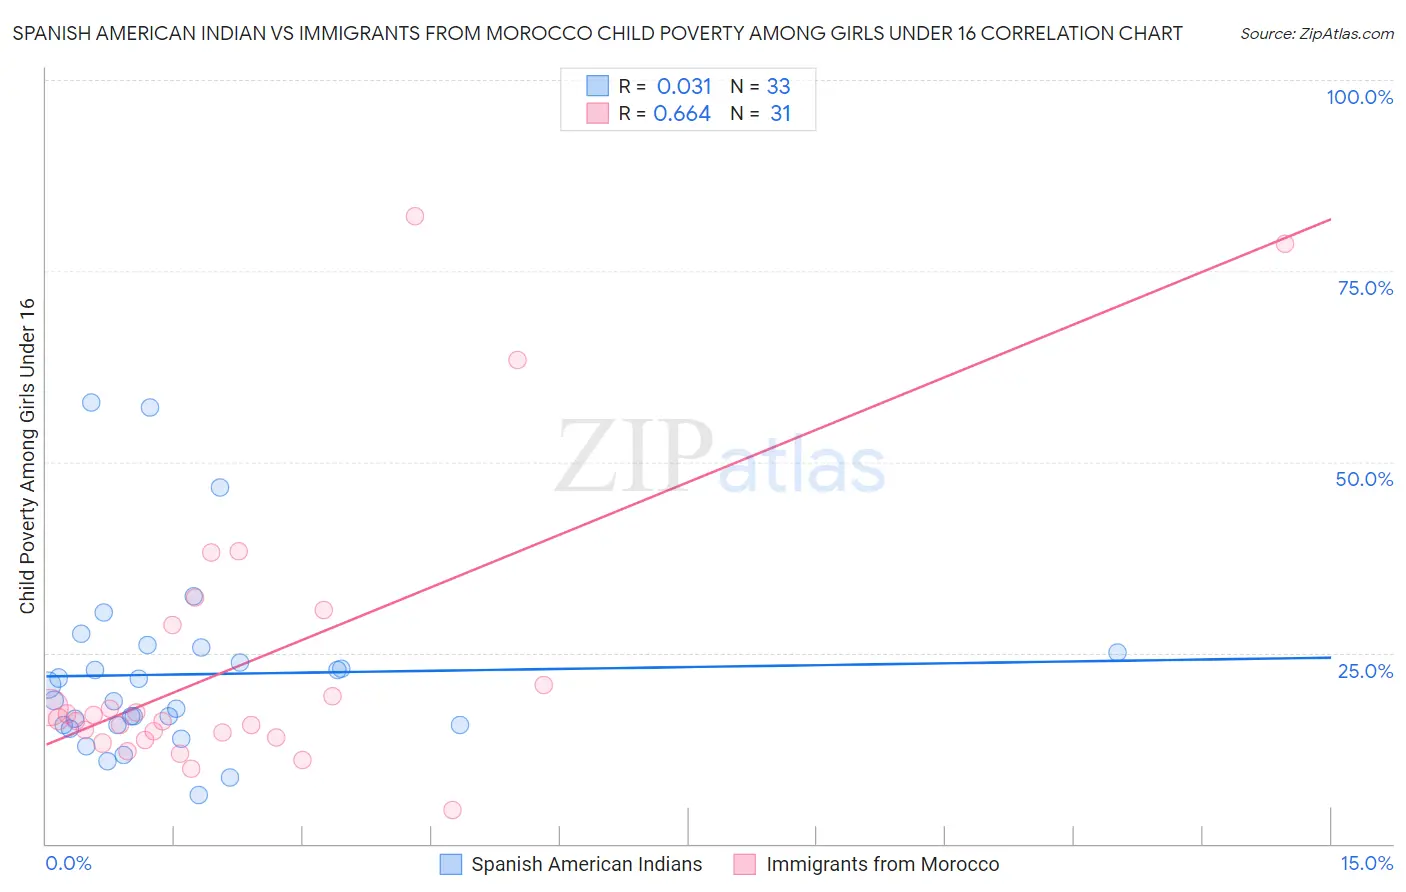 Spanish American Indian vs Immigrants from Morocco Child Poverty Among Girls Under 16